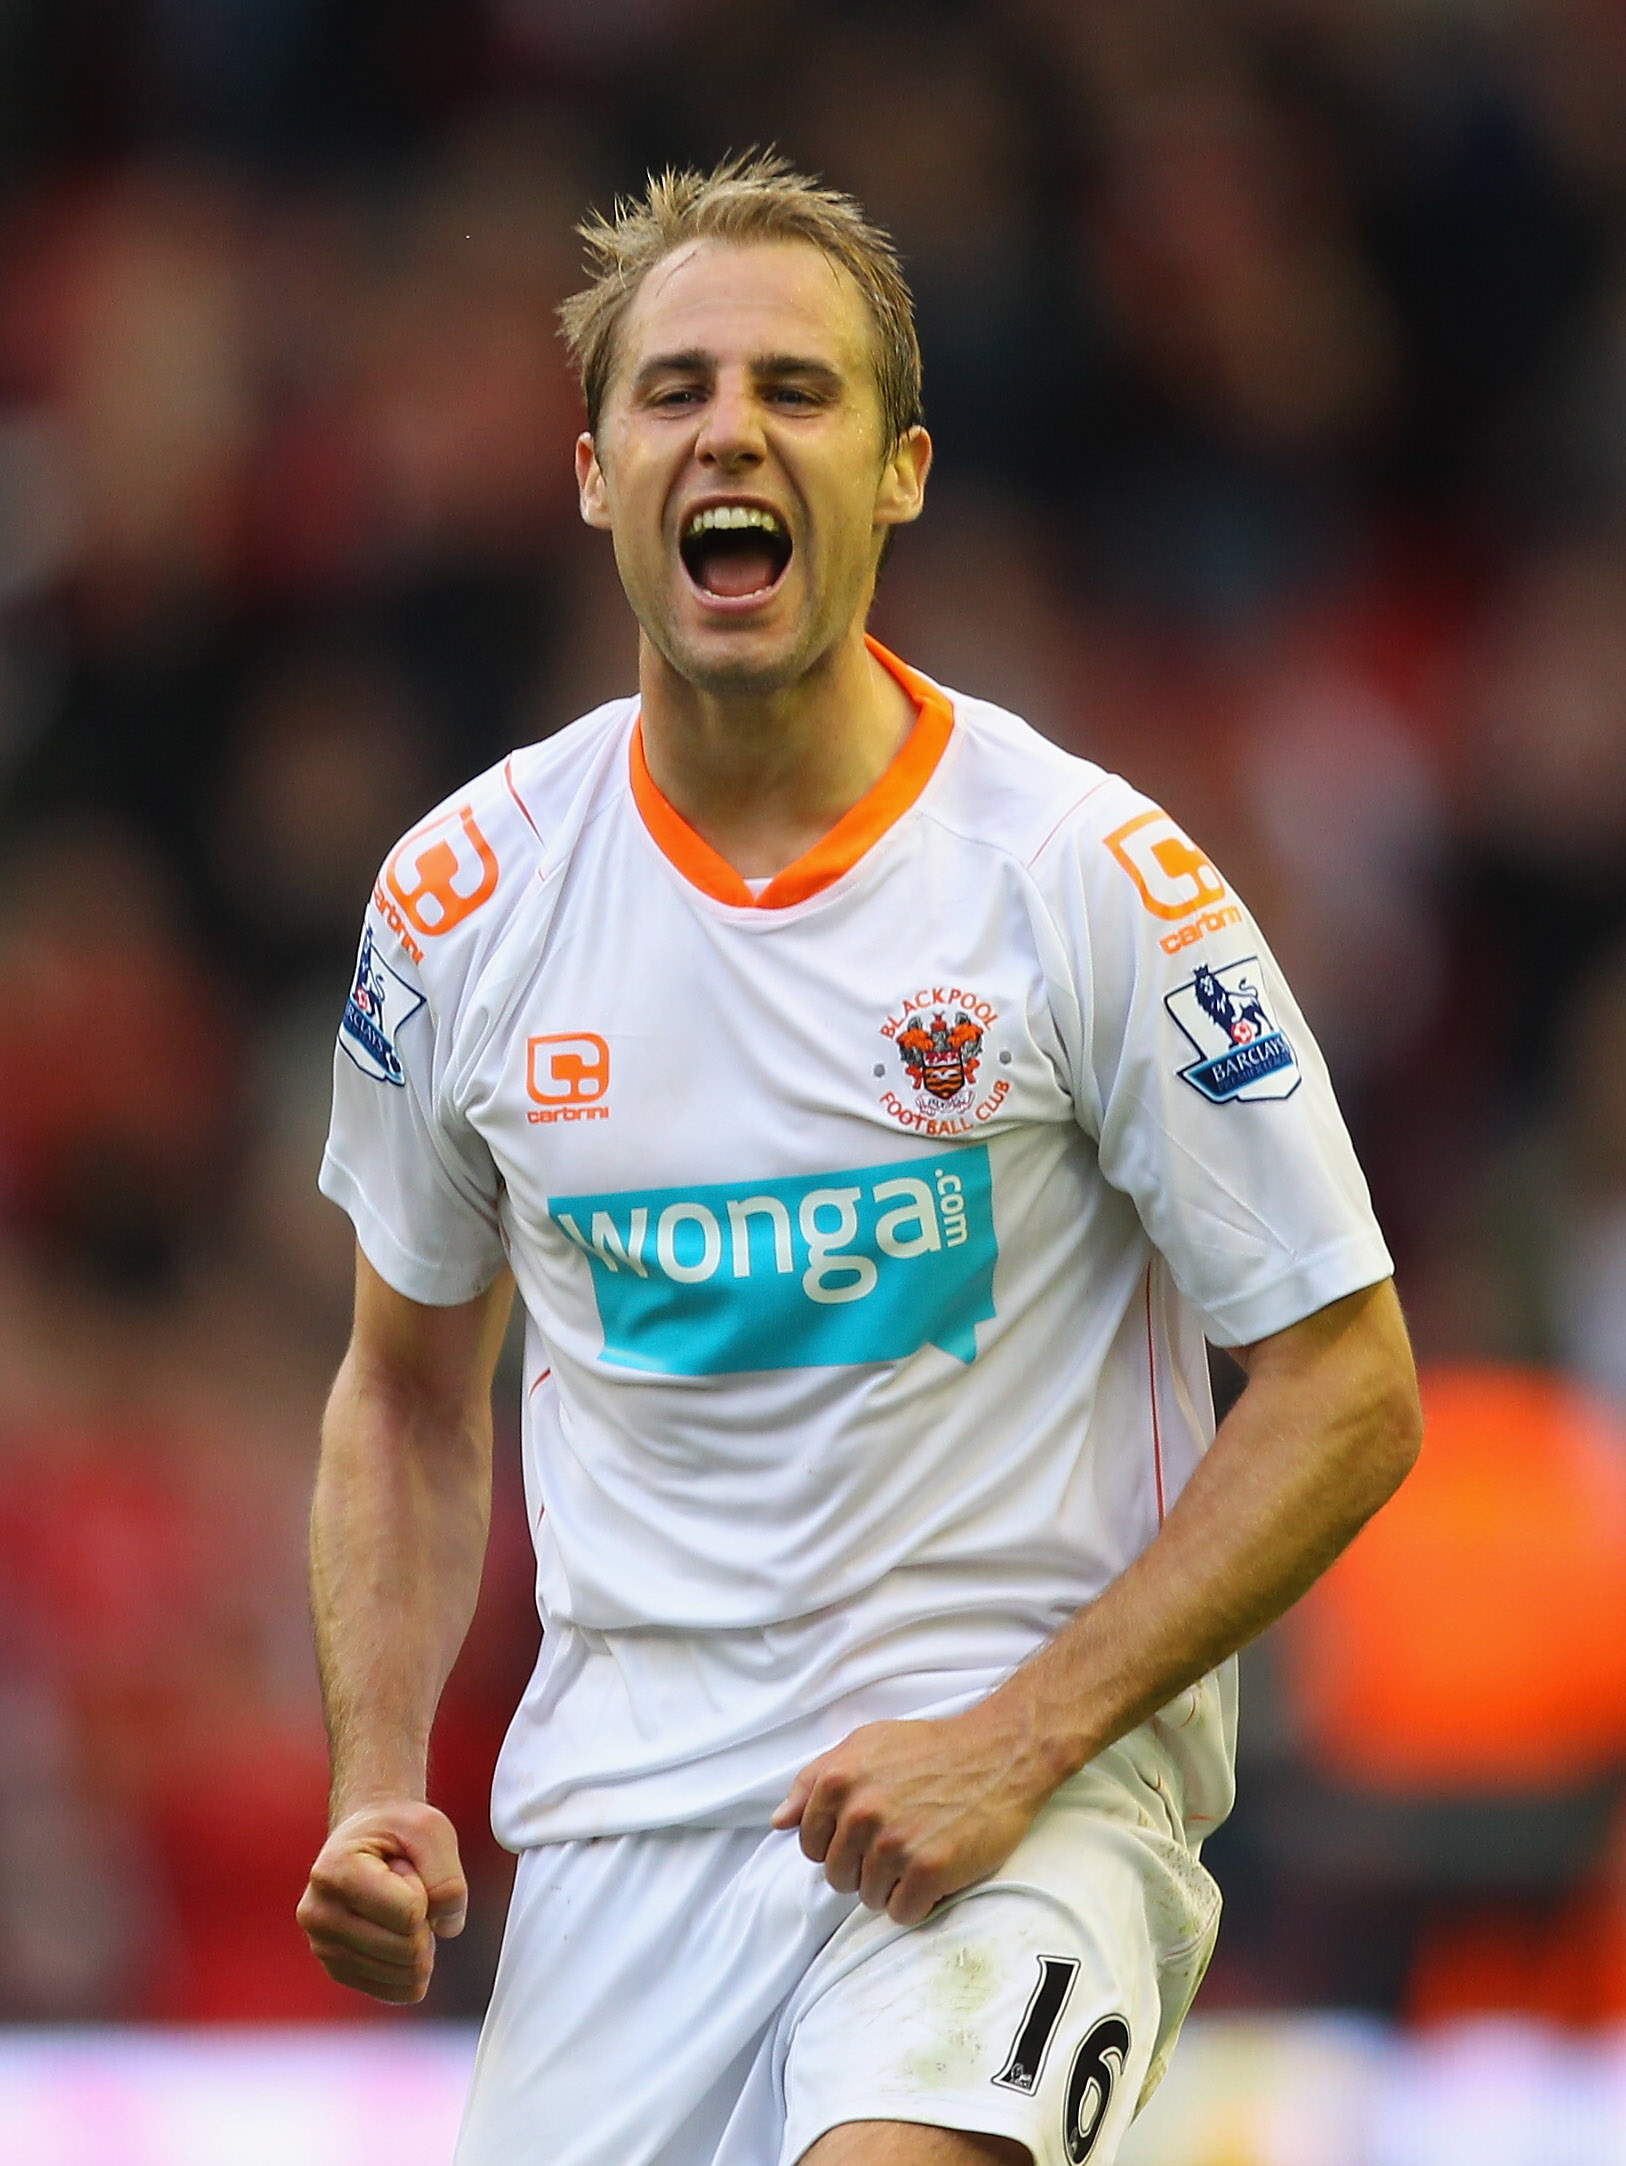 LIVERPOOL, ENGLAND - OCTOBER 03:  Luke Varney of Blackpool celebrates after victory over Liverpool the Barclays Premier League match between Liverpool and Blackpool at Anfield on October 3, 2010 in Liverpool, England.  (Photo by Alex Livesey/Getty Images)